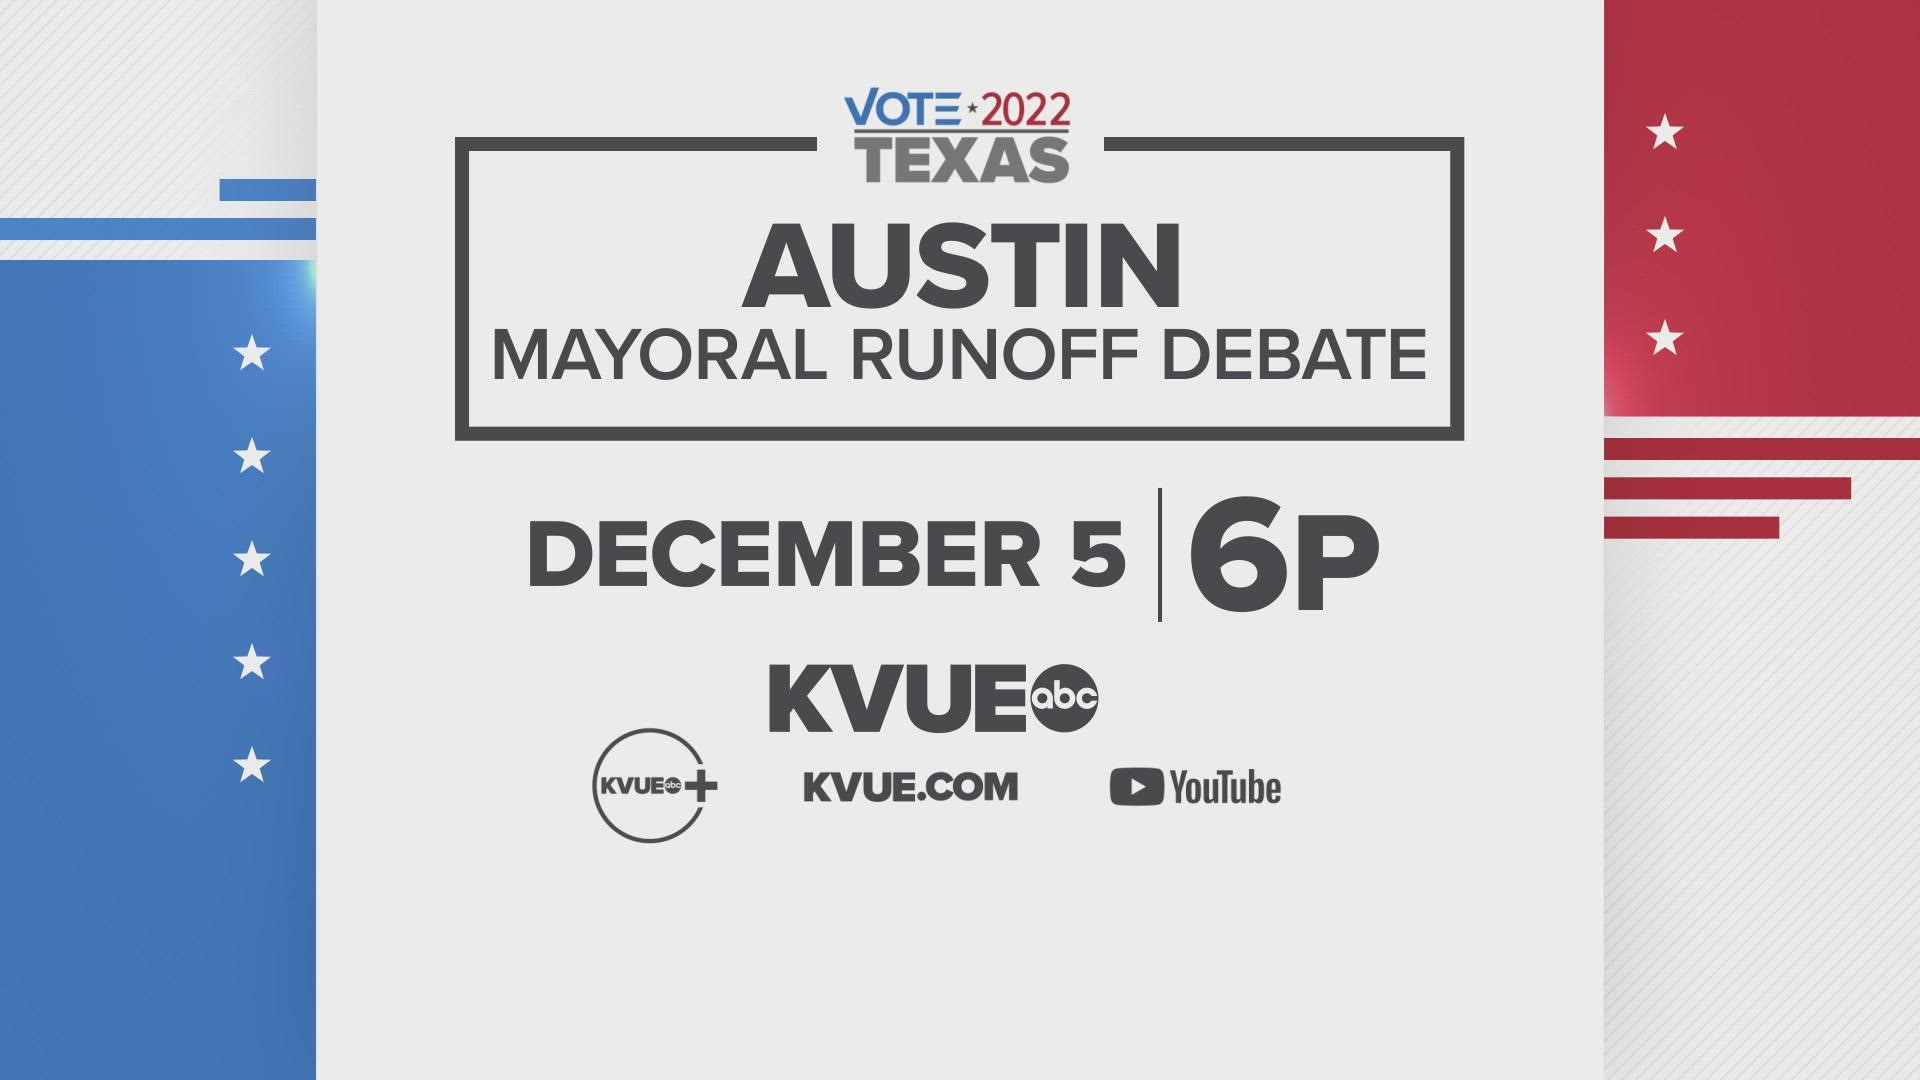 KVUE will hold a mayoral runoff debate on Dec. 5.